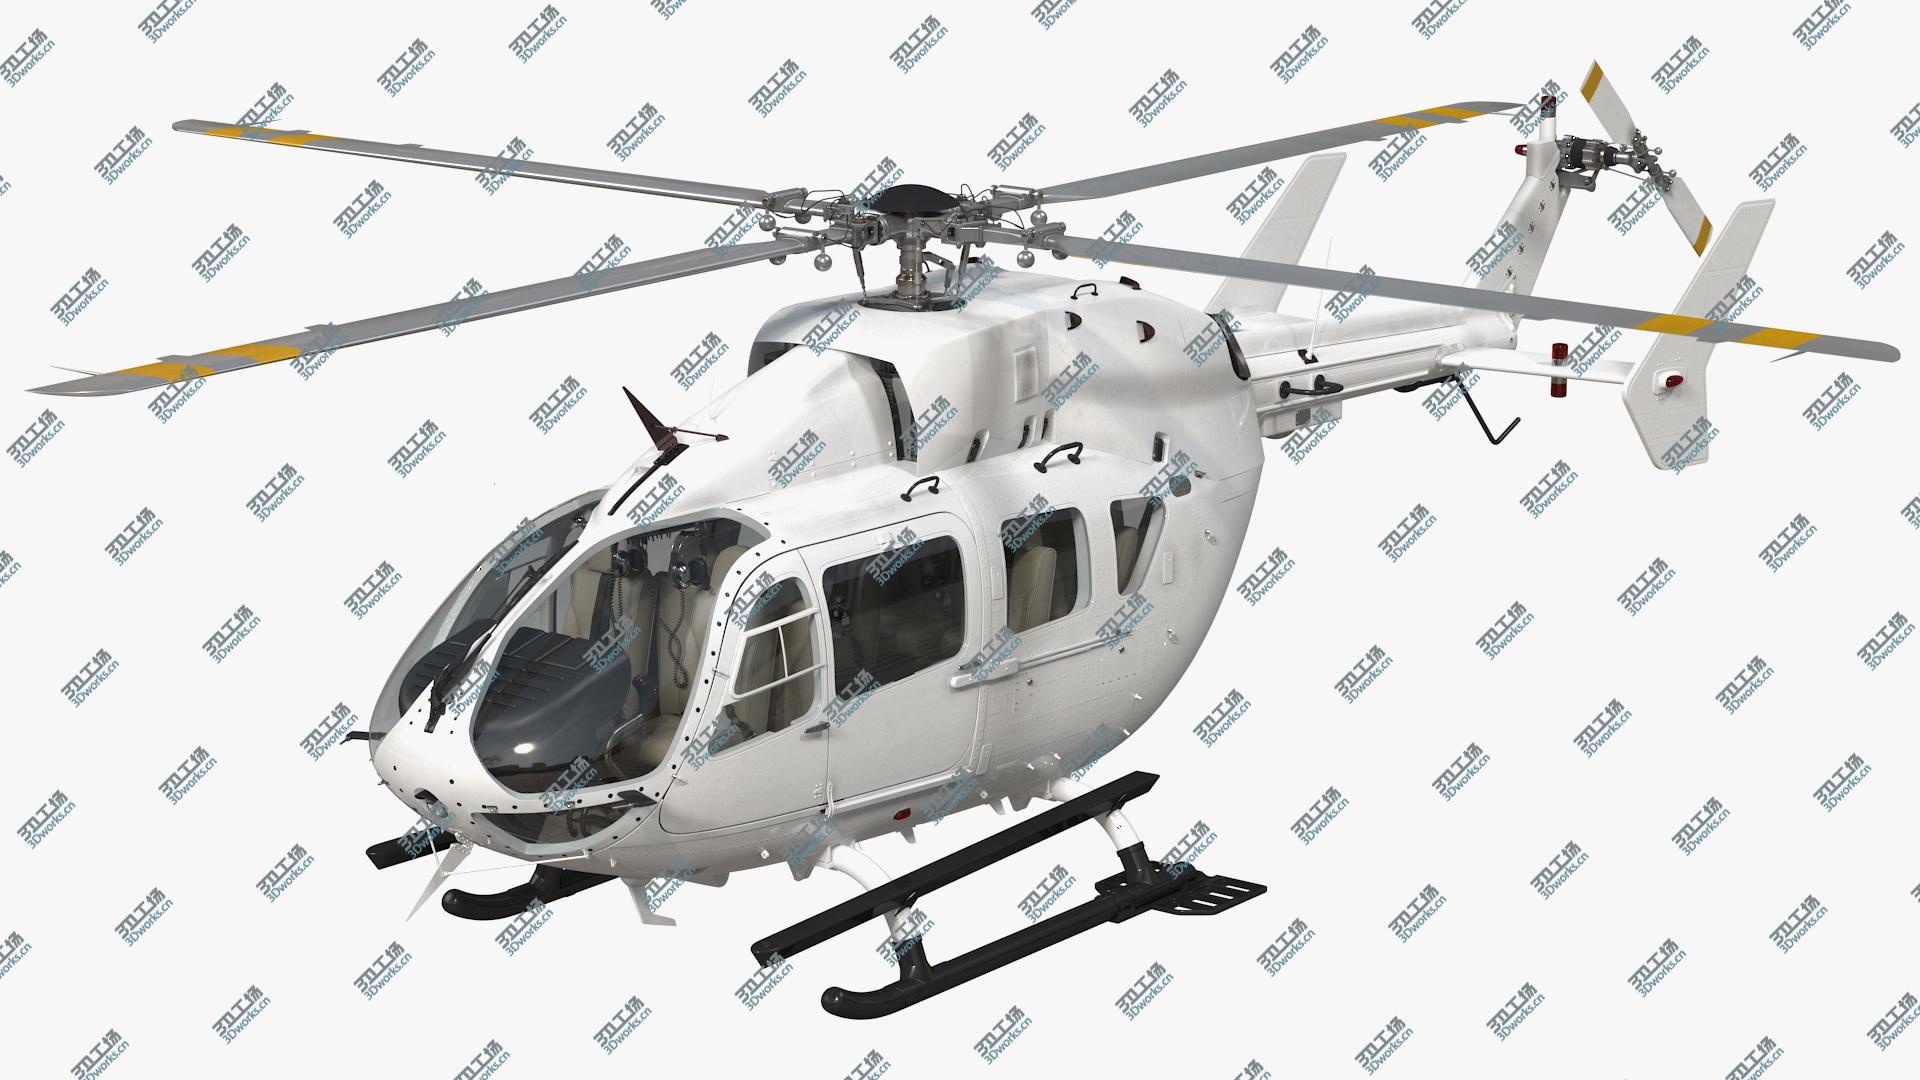 images/goods_img/20210319/3D Twin Engine Light Utility Helicopter/1.jpg